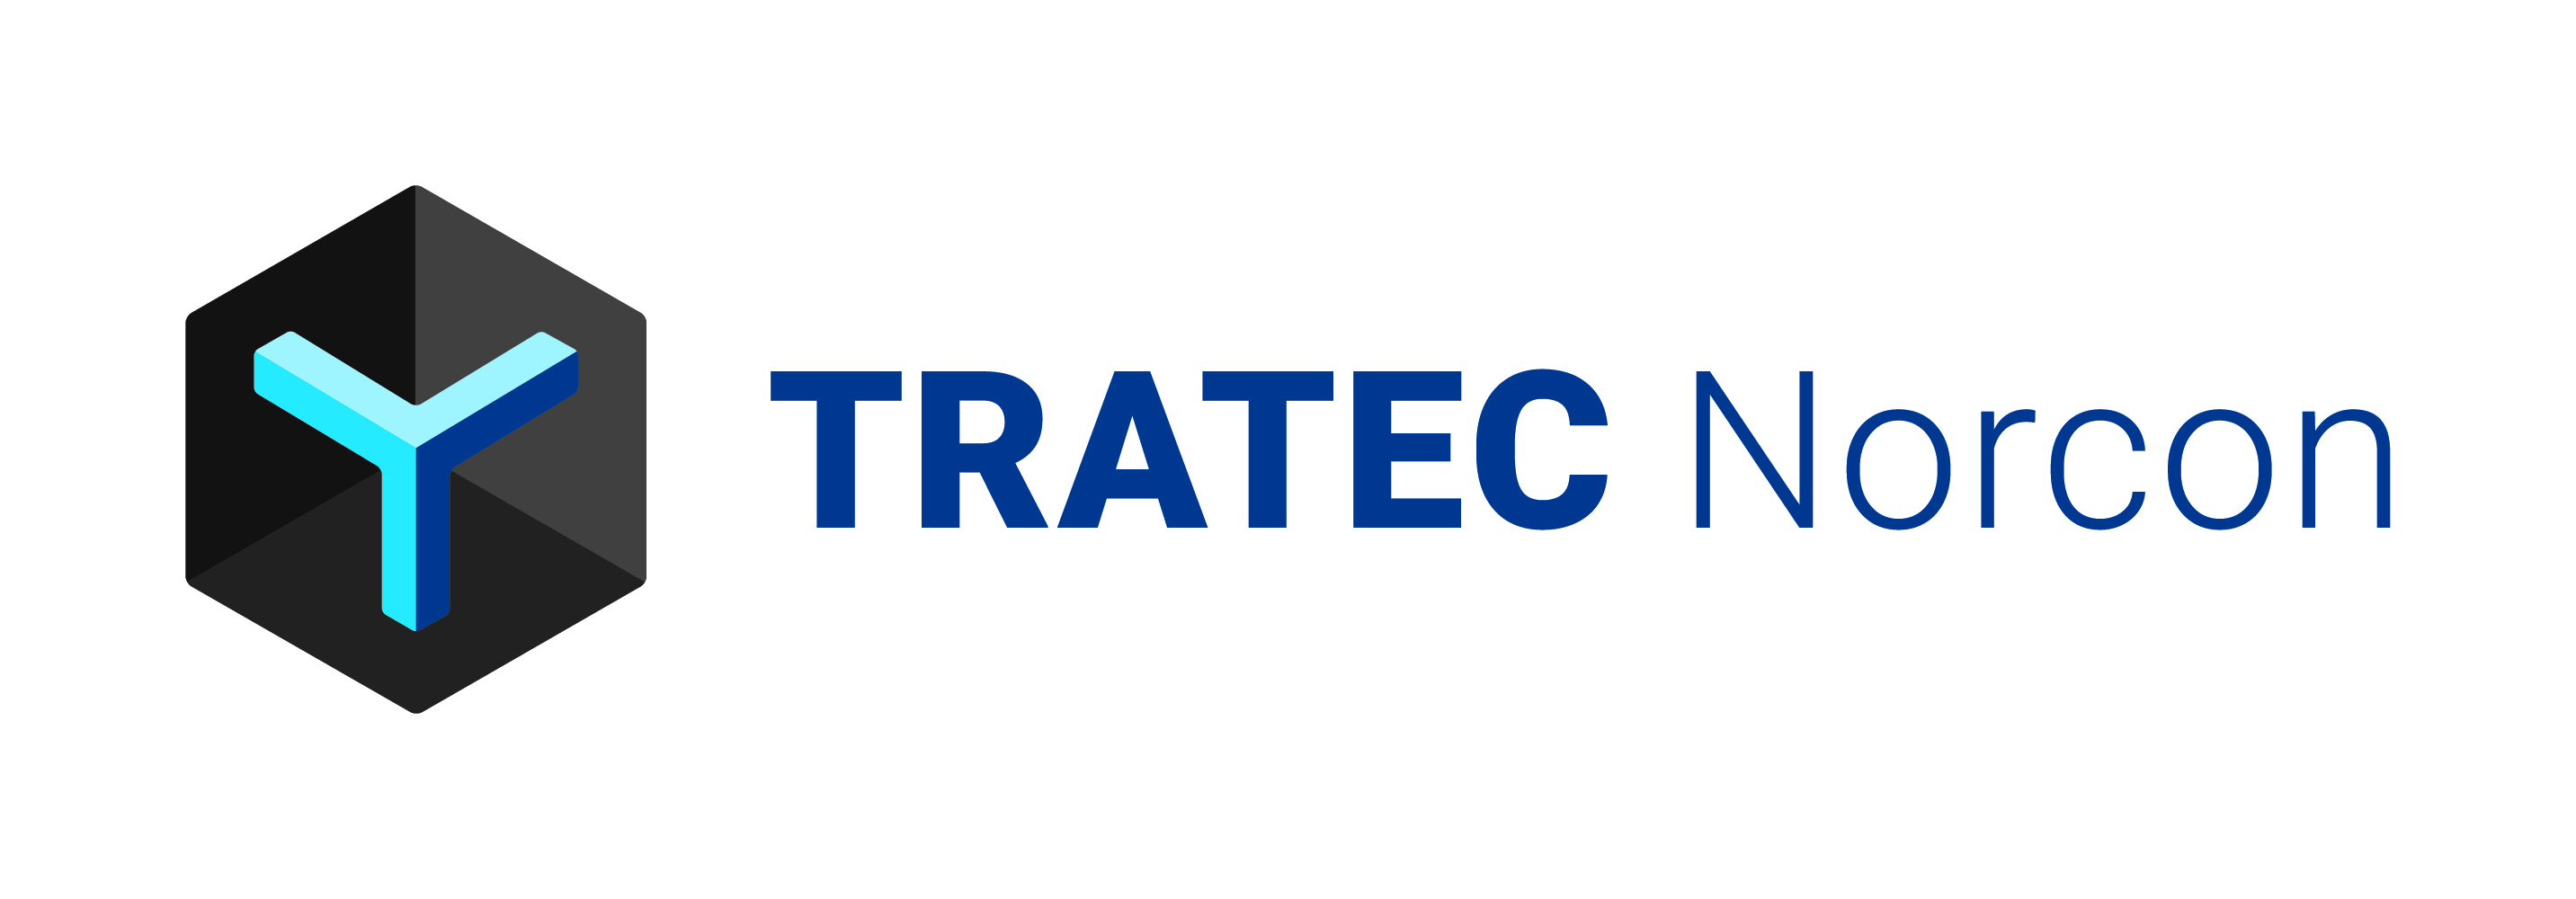 Tratec Norcon AS